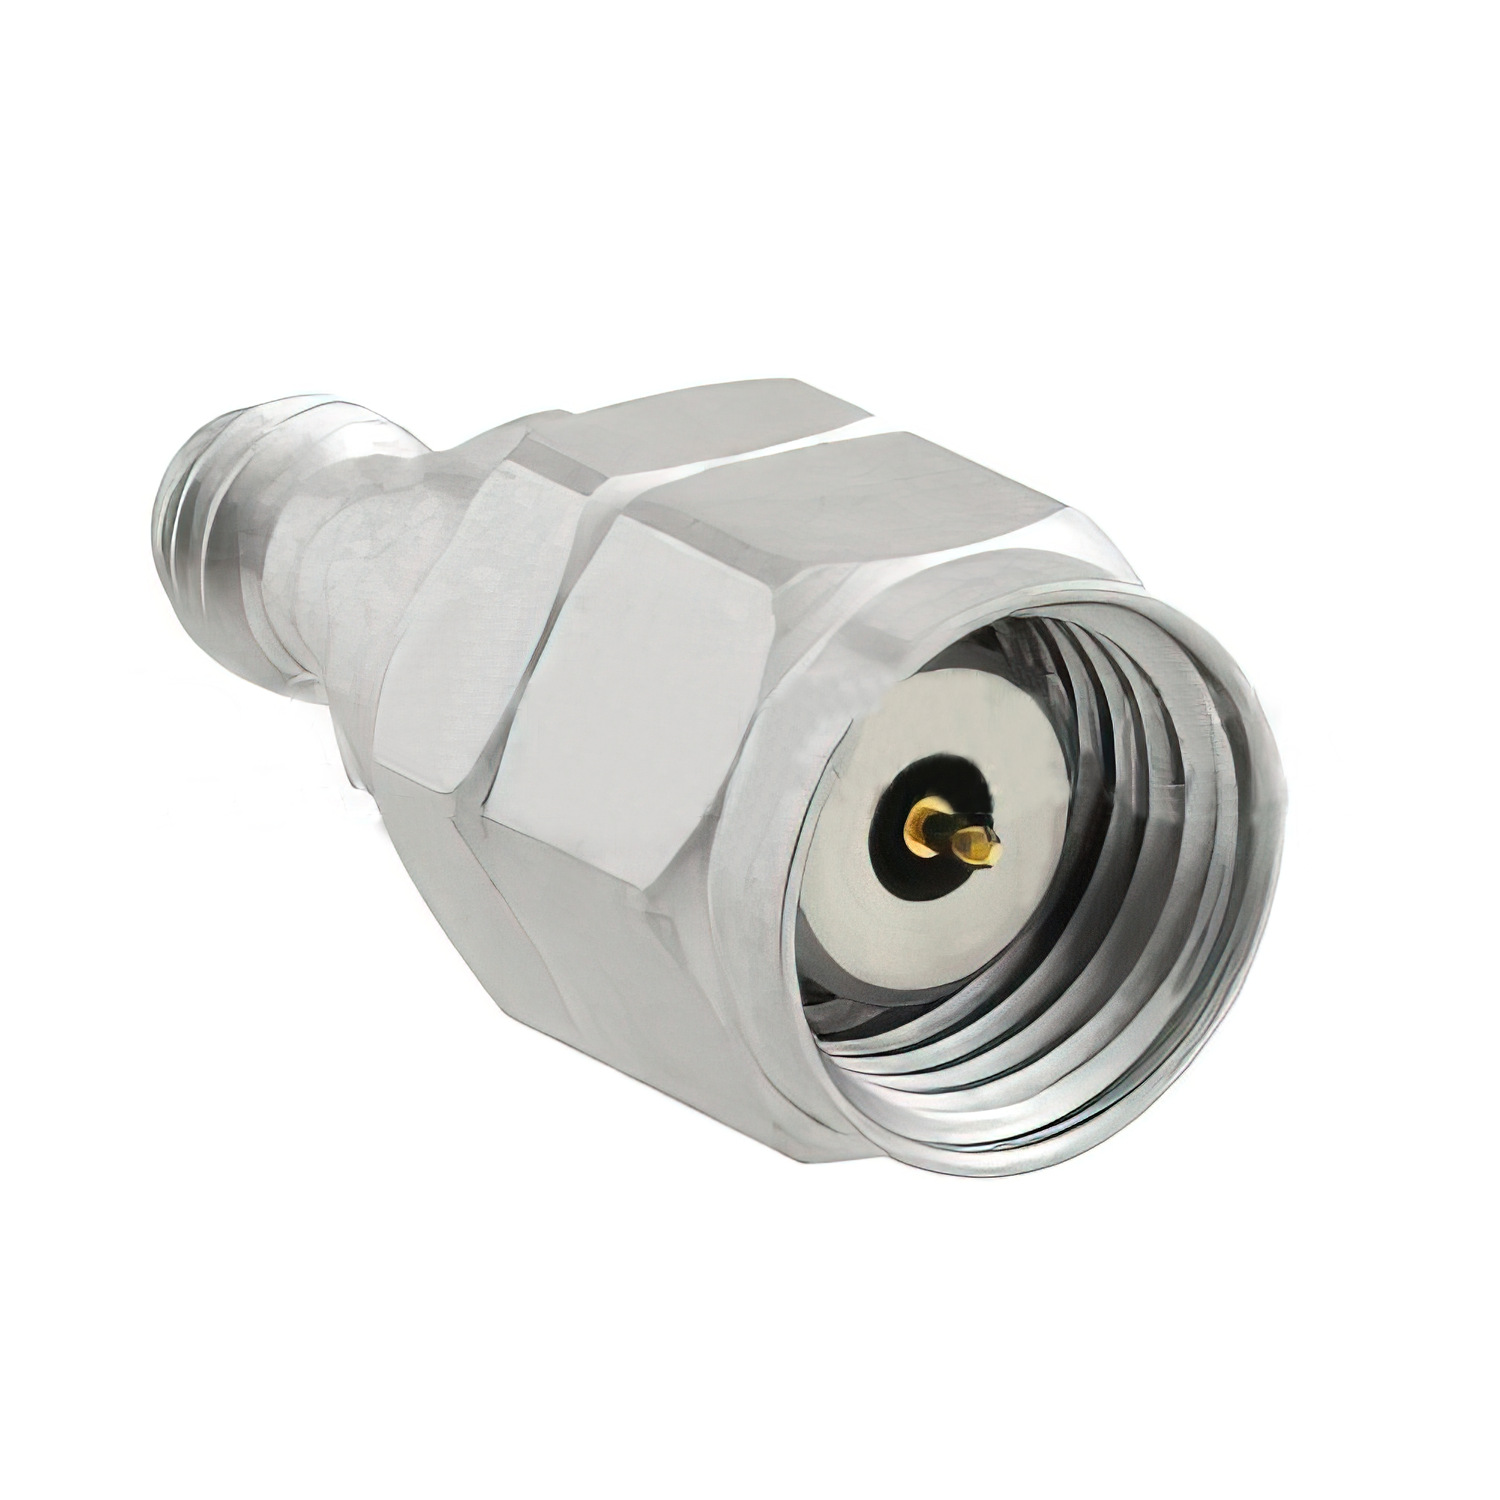 1.0mm Female to 1.85mm Male Adapter1